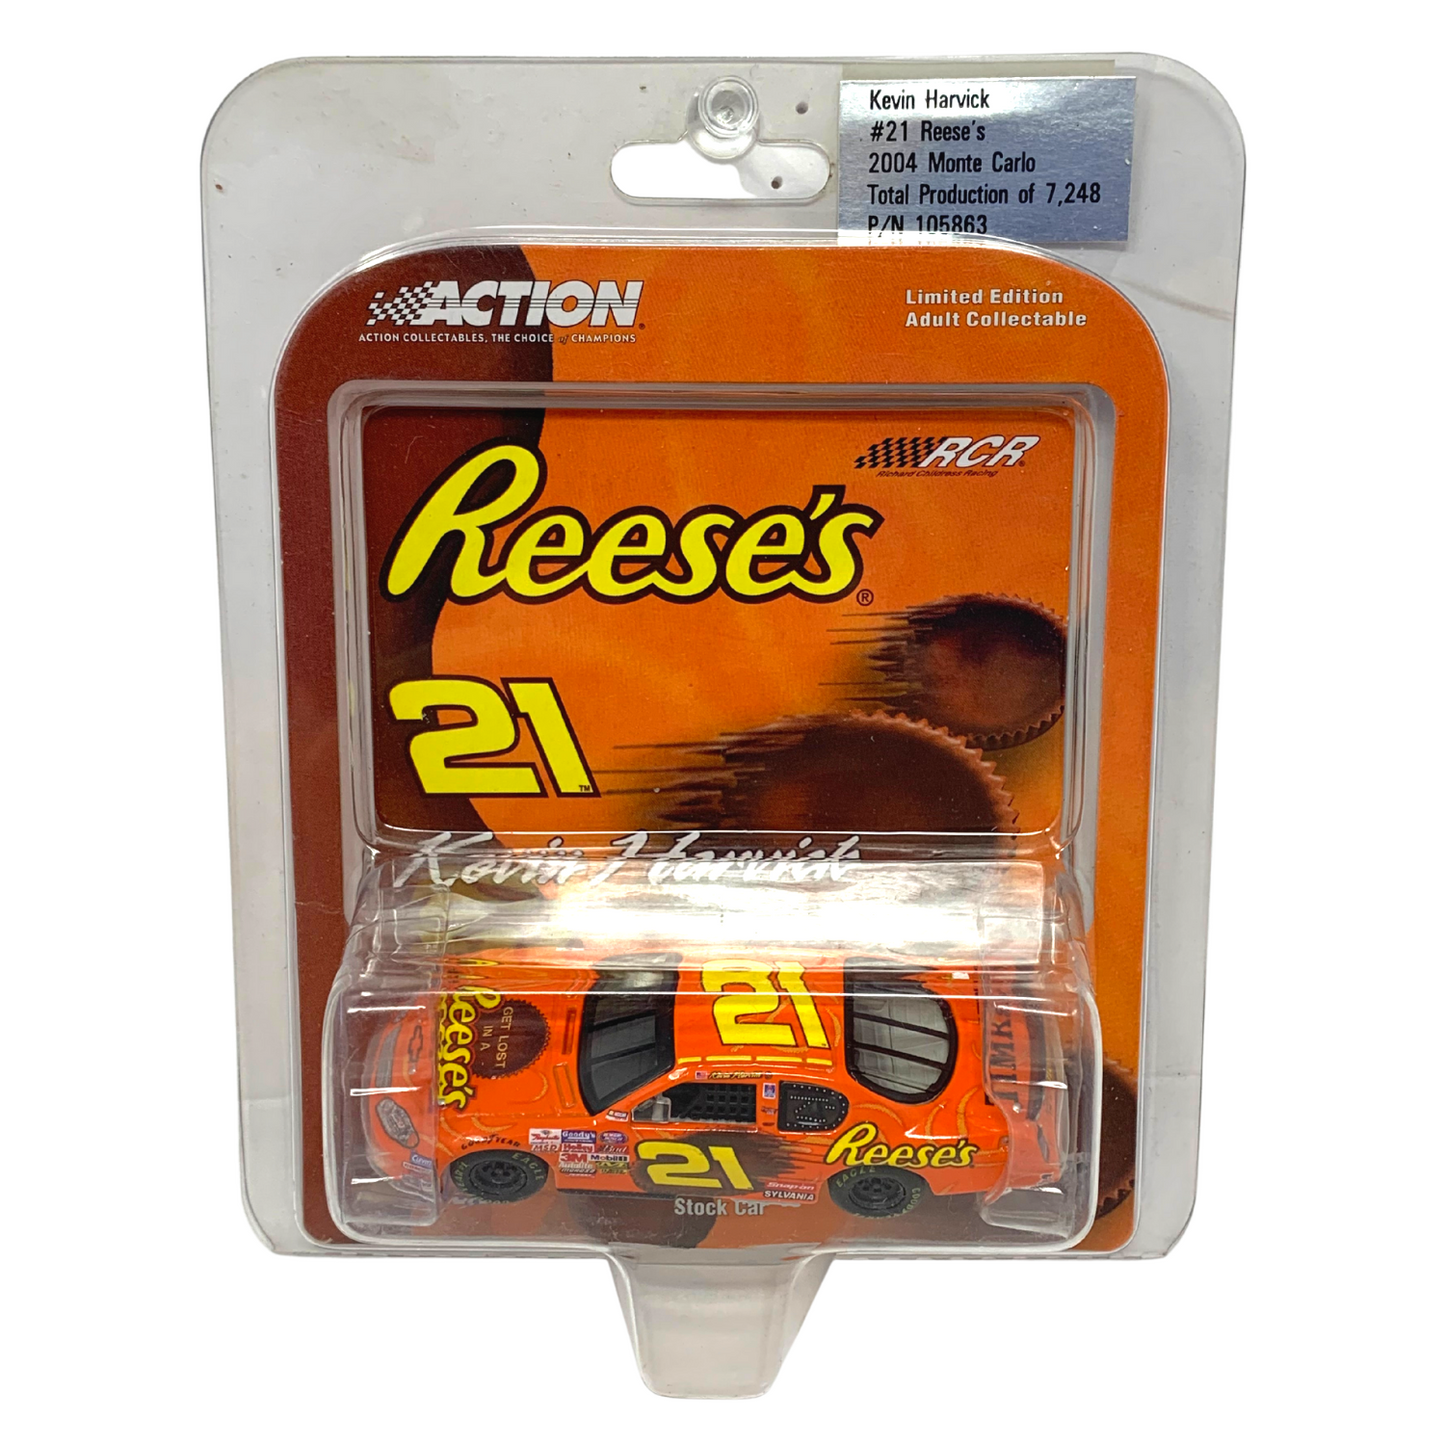 Action Nascar #21 Reese's Kevin Harvick 2004 Monte Carlo 1:64 Diecast